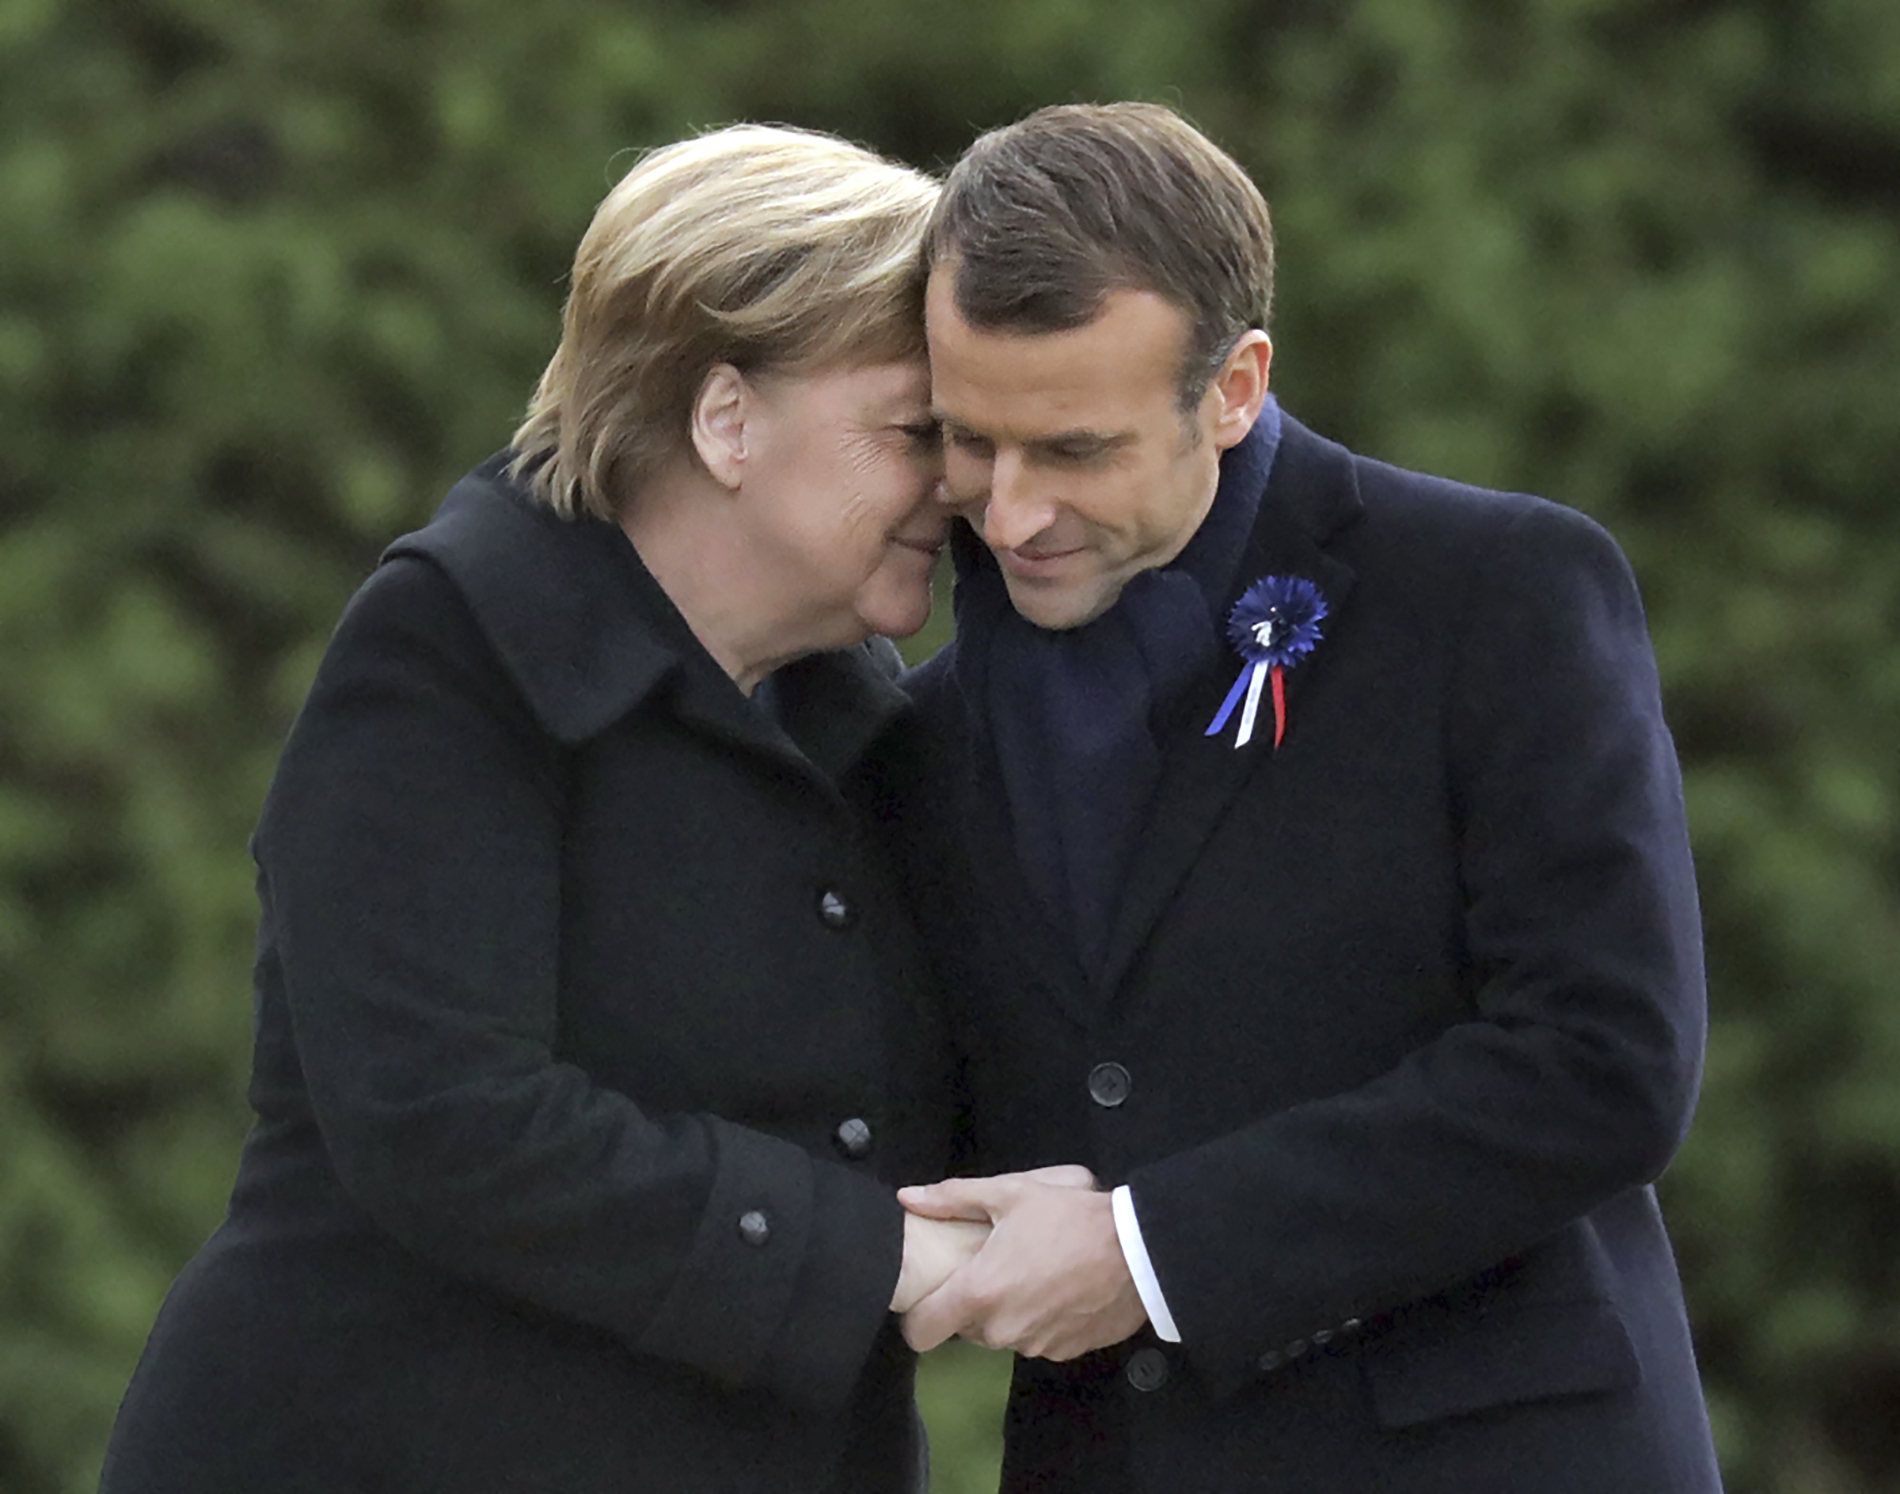 10 November 2018, France, Compiegne: German Chancellor Angela Merkel (CDU) and French President Emmanuel Macron commemorate the end of the First World War 100 years ago near the northern French town of Compi'gne. The armistice was signed on 11 November 1918 in a converted dining car in the clearing. The memorial is located on this site. Photo by: Kay Nietfeld/picture-alliance/dpa/AP Images